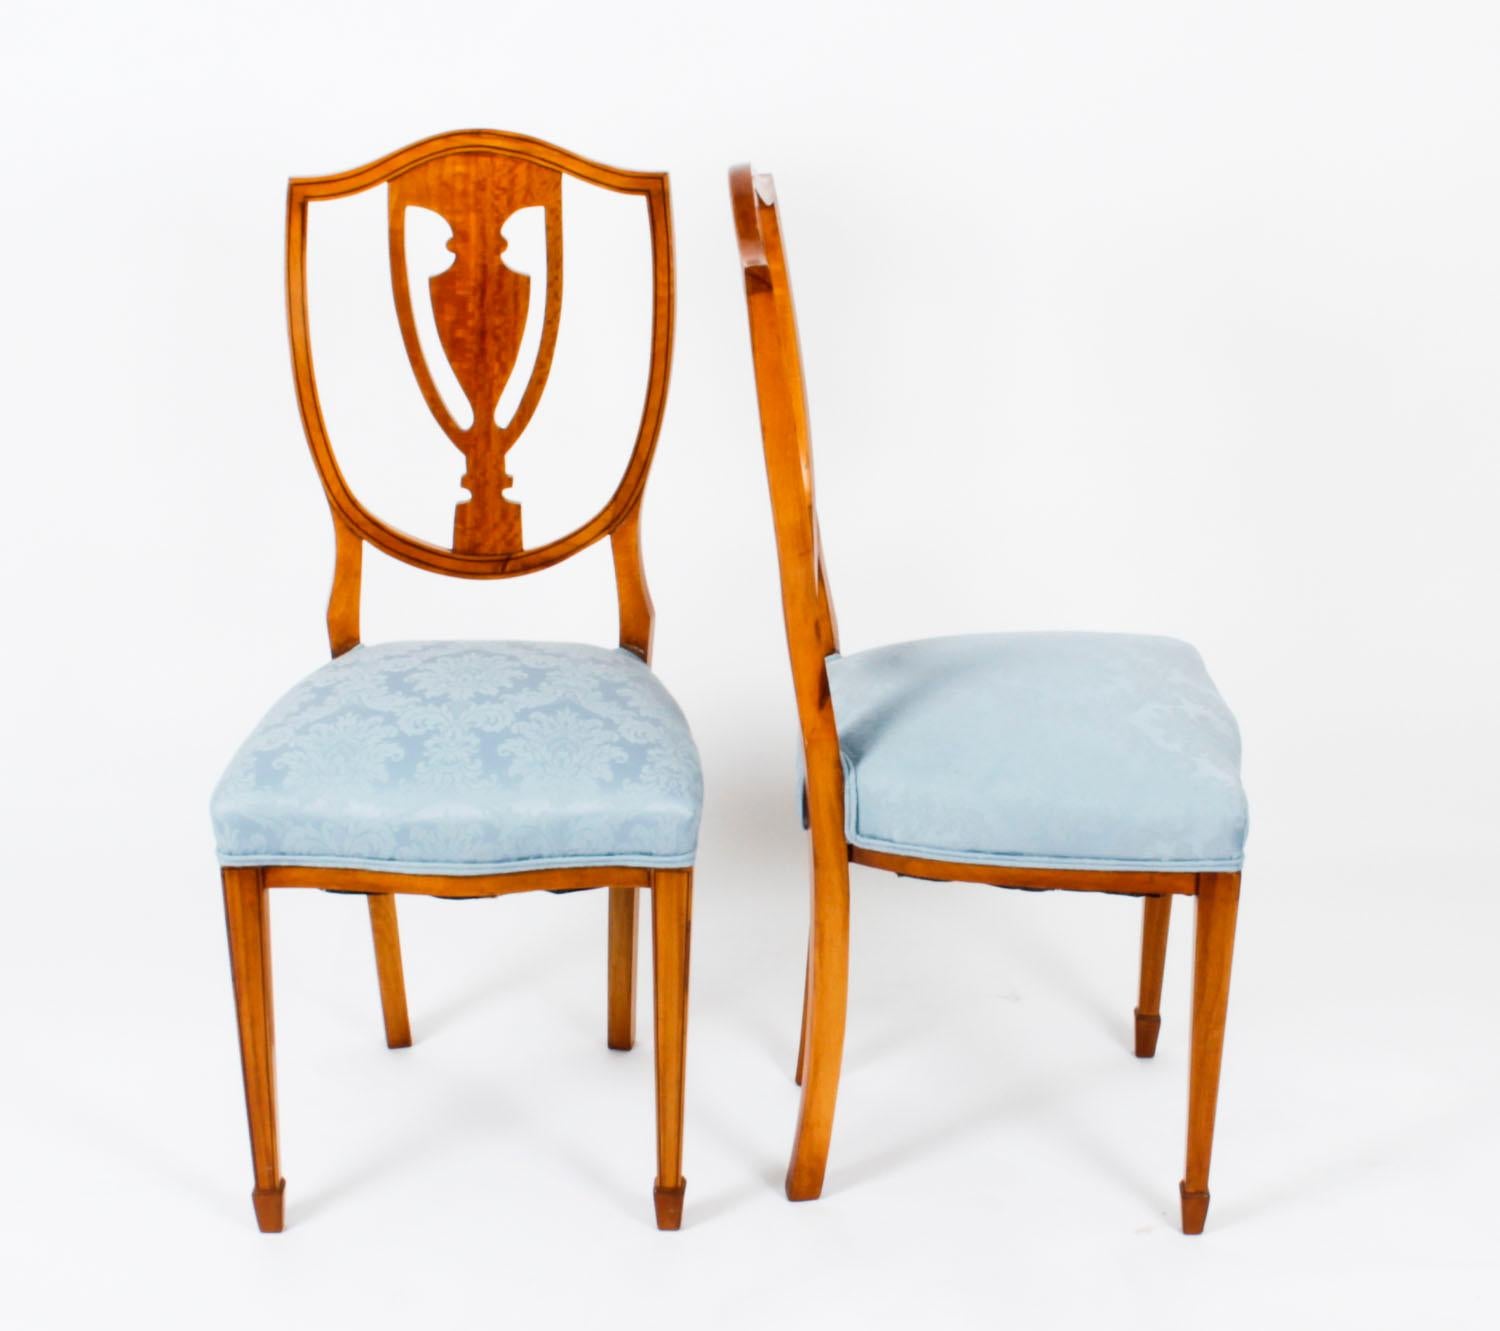 This is a lovely pair of antique Victorian shield back satinwood chairs, circa 1880 in date.
 
The stunning chairs feature sumptuous and highly attractive shield backs with a pierced back in the form of a classical vase and twin ebonized line